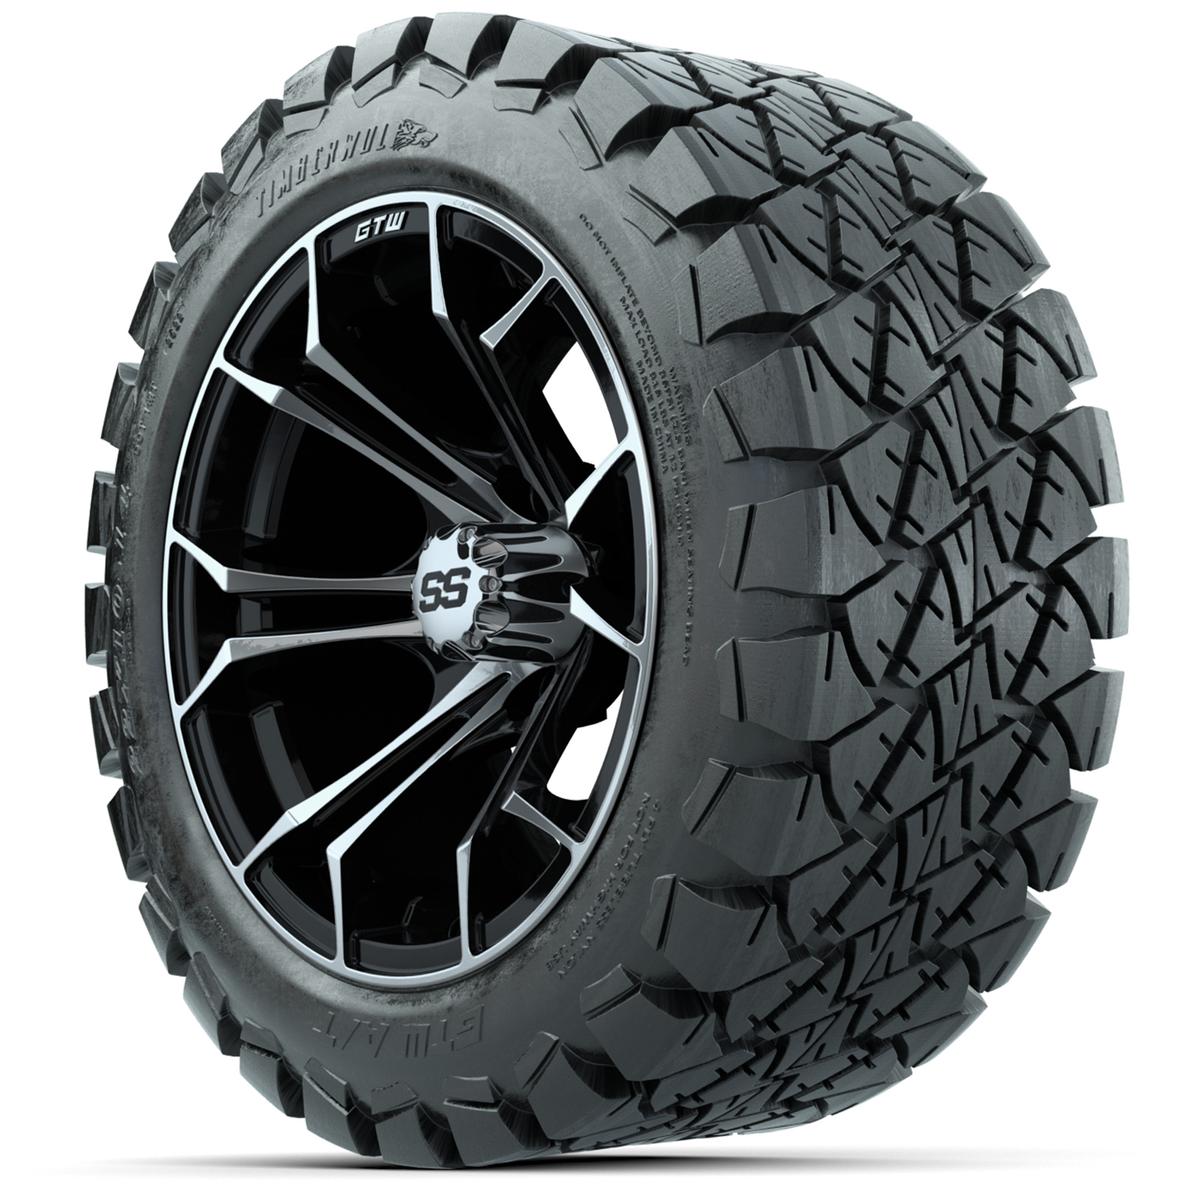 GTW Spyder Machined/Black 14 in Wheels with 22x10-14 GTW Timberwolf All-Terrain Tires – Full Set